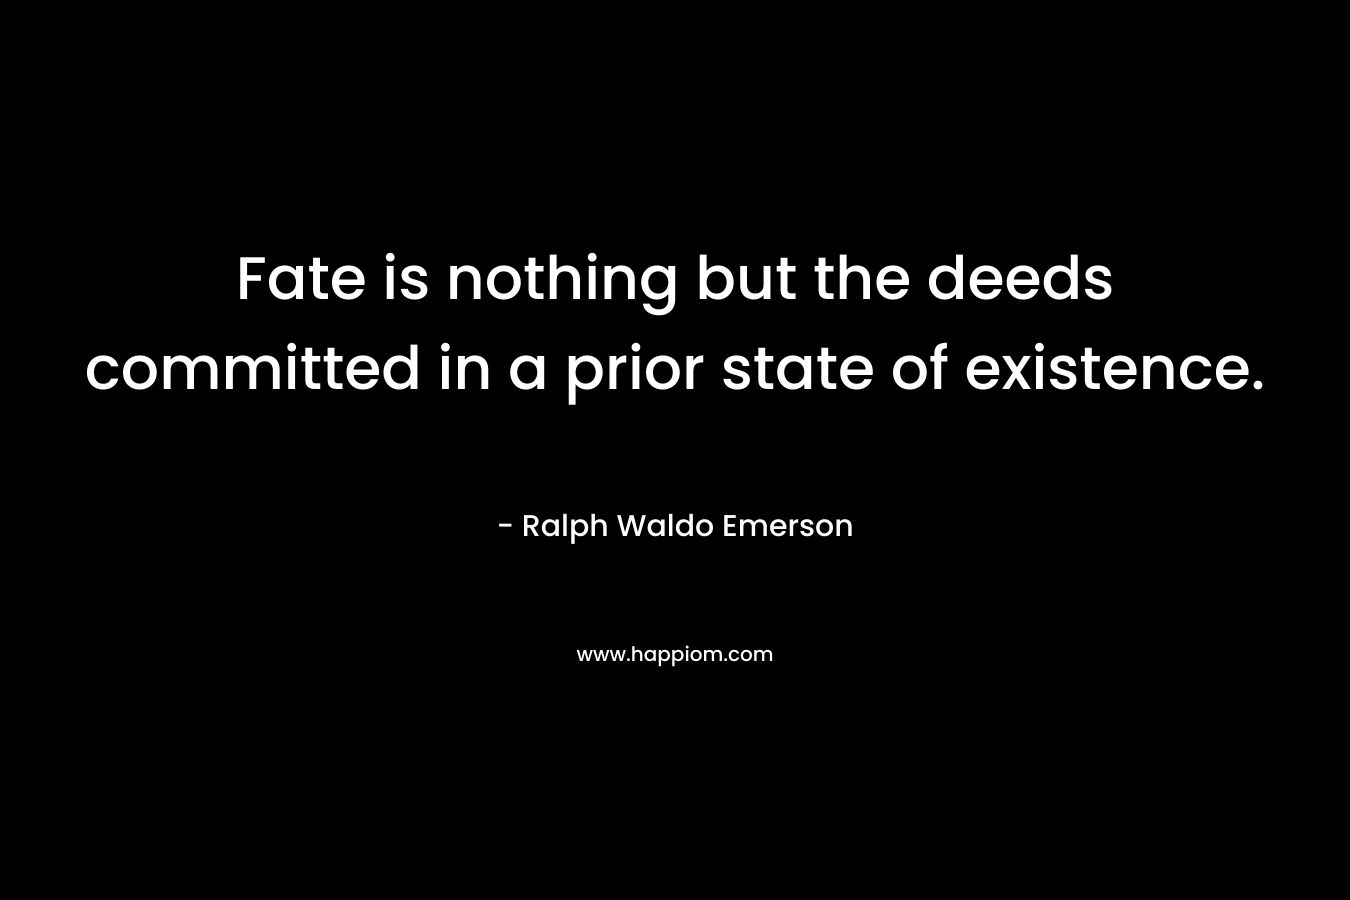 Fate is nothing but the deeds committed in a prior state of existence. – Ralph Waldo Emerson